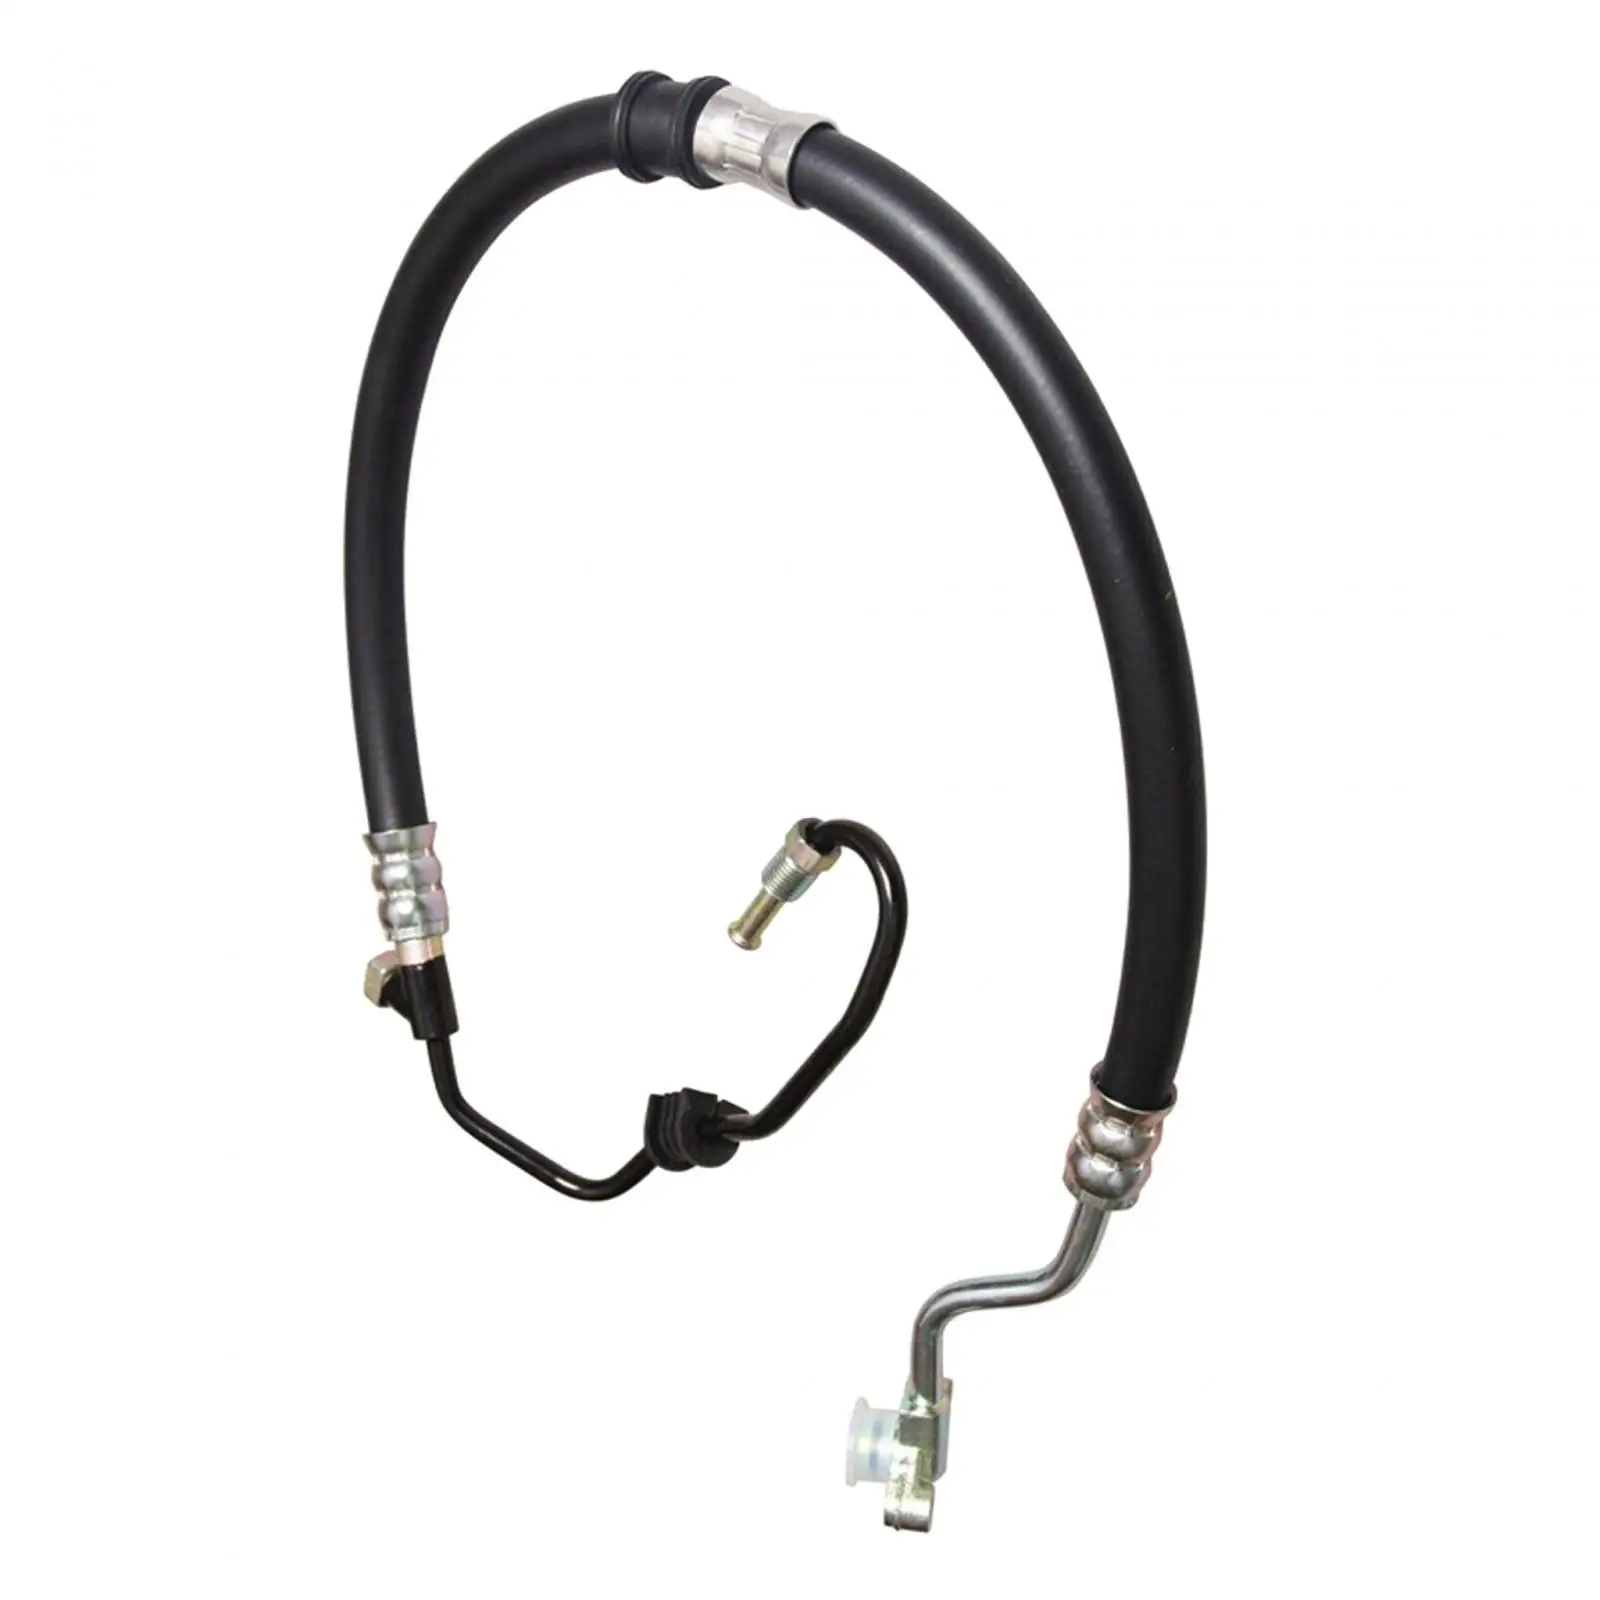 Power Steering Hose 53713-s84-a04 ,Professional Repair Parts ,Easy to Install